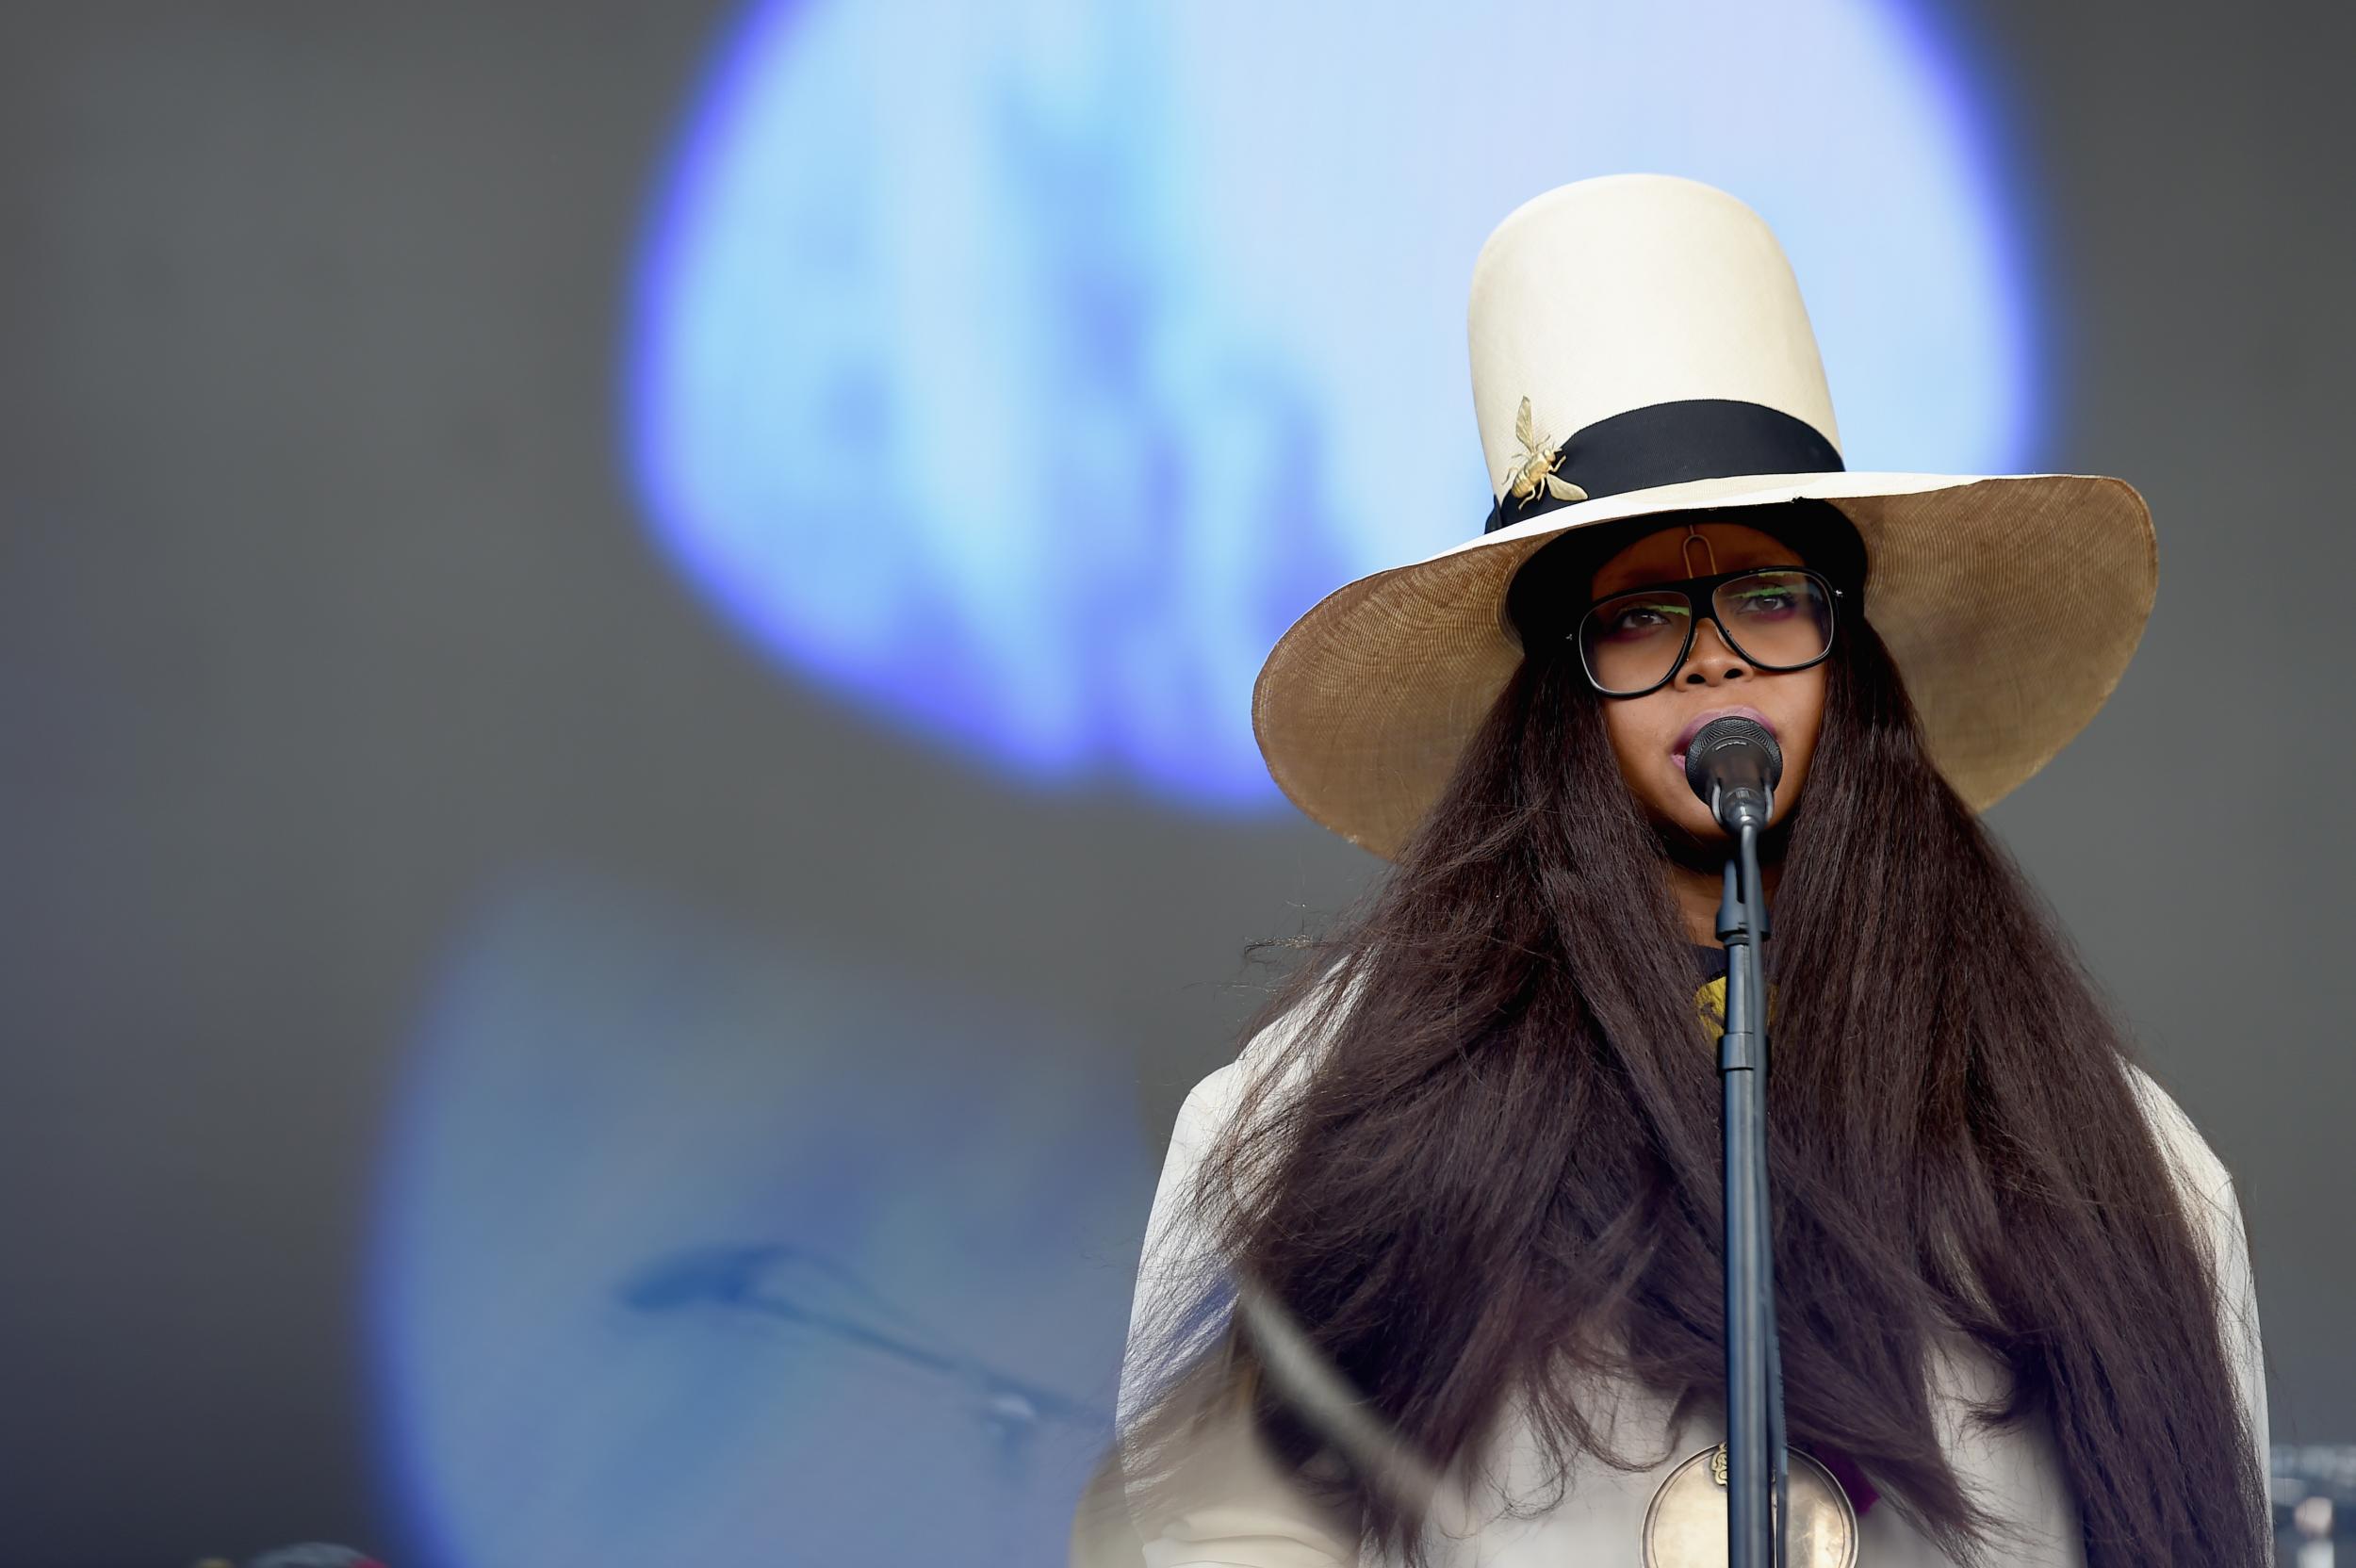 Erykah Badu performs onstage during the Meadows Music and Arts Festival - Day 2 at Citi Field on September 16, 2017 in New York City. Credit: Nicholas Hunt/Getty Images.